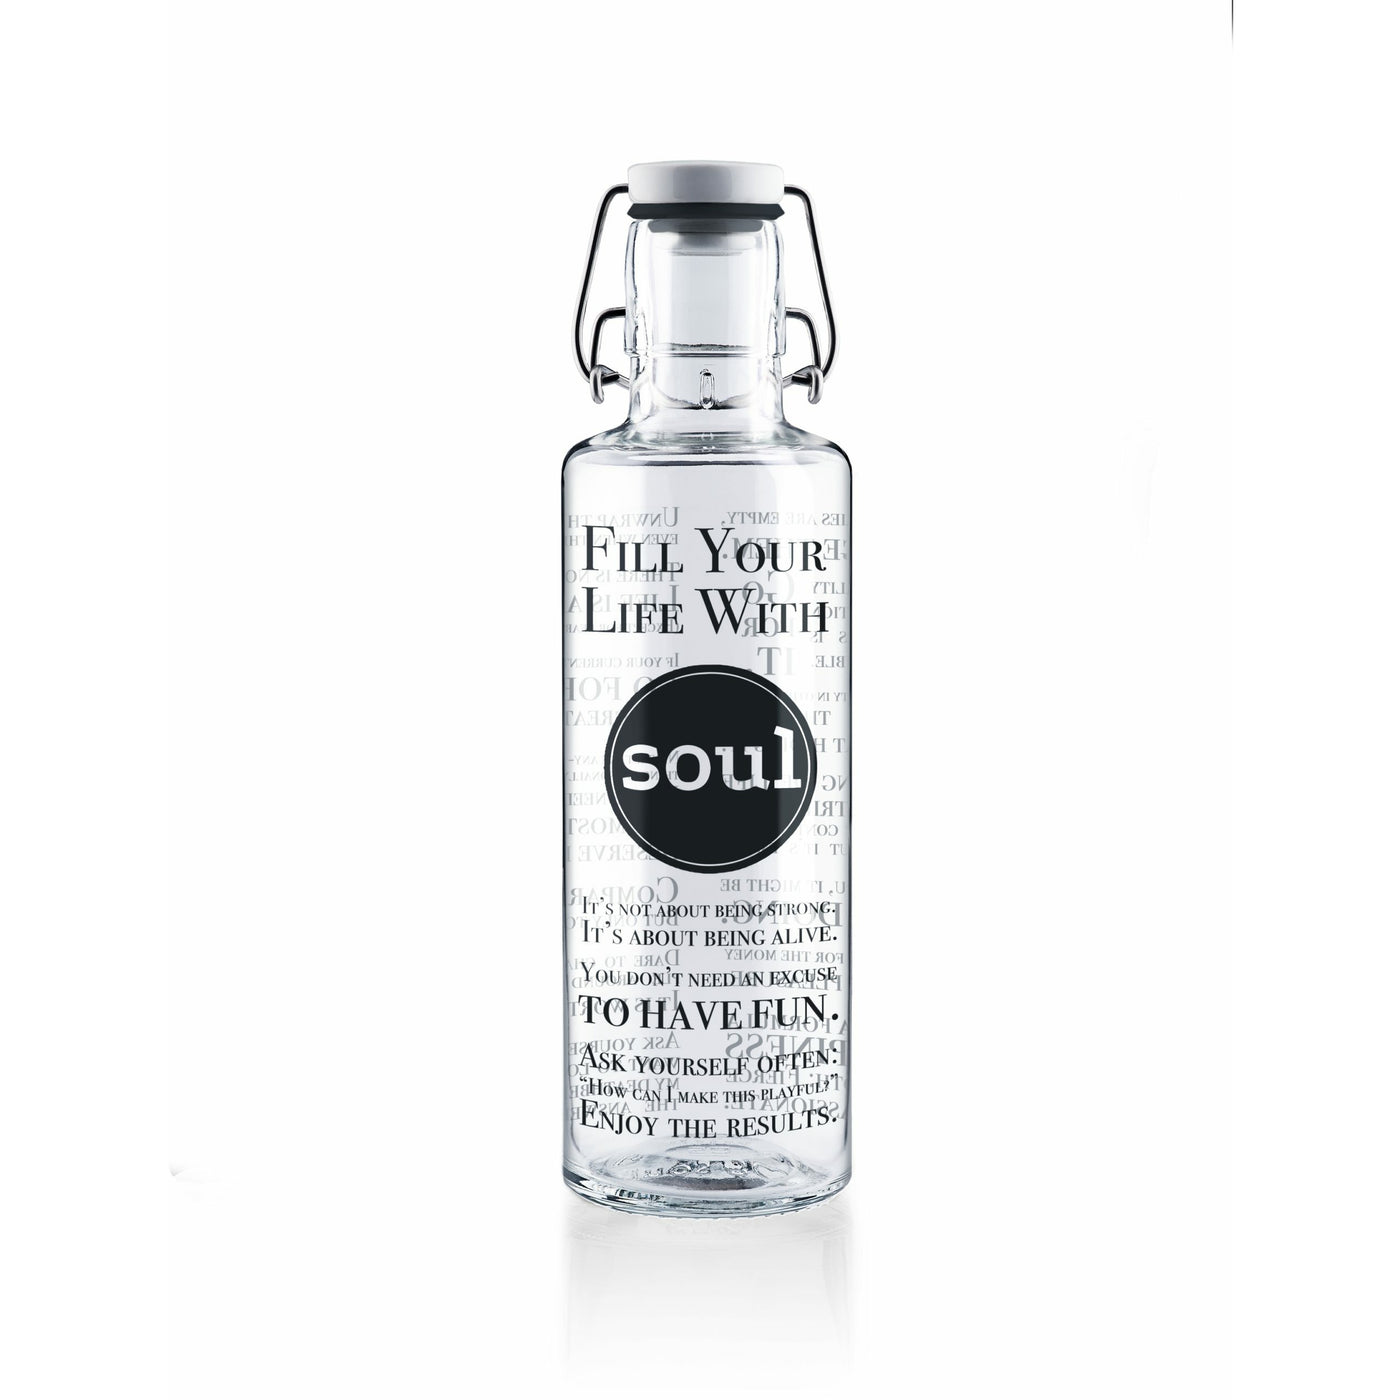 soulbottle 0,6l "Fill your Life with soul"